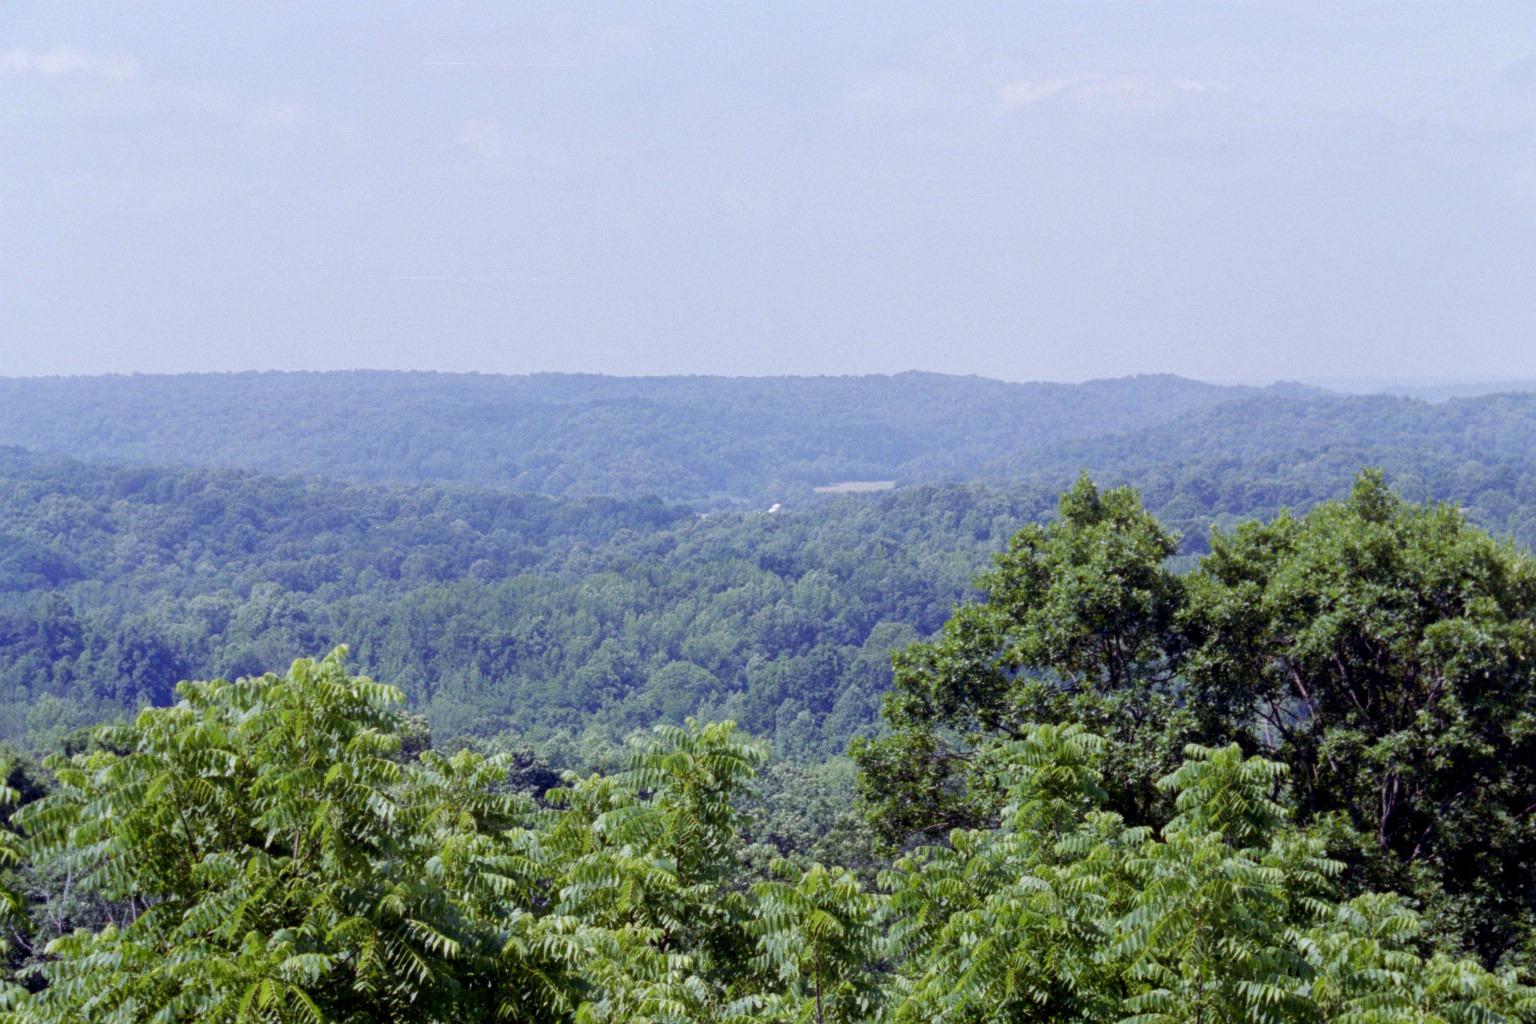 an overlook point is seen with the view over trees